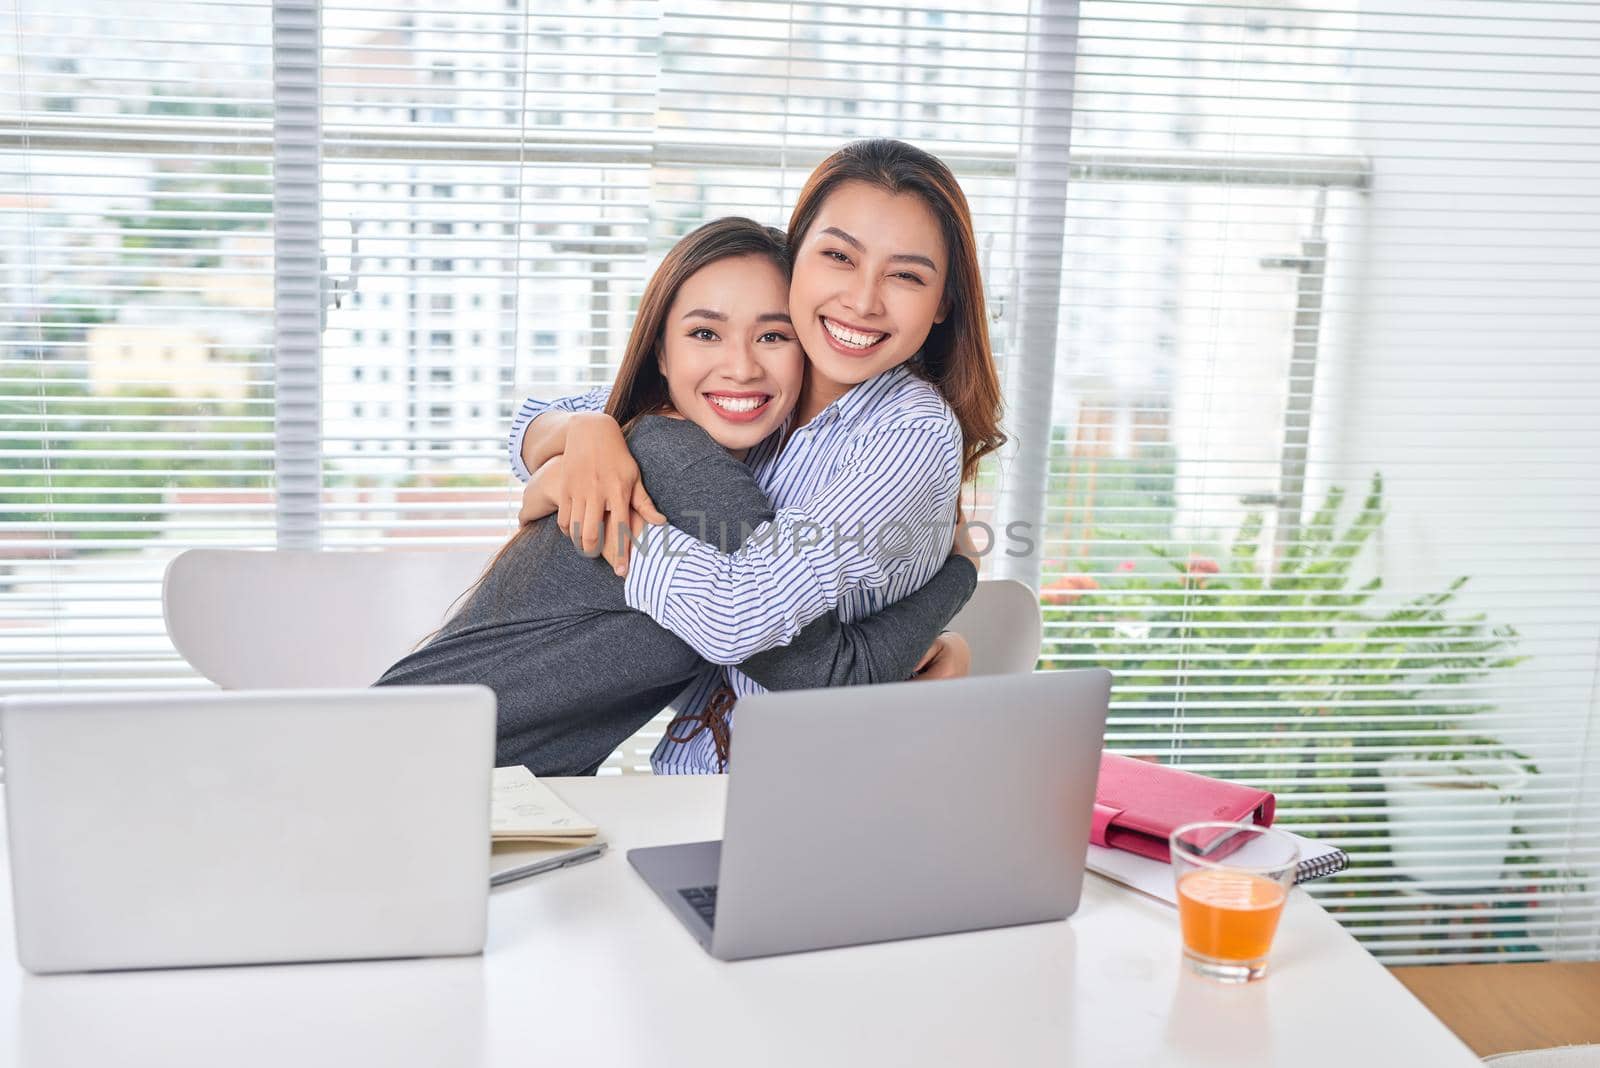 Indoor portrait of smiling girls working together in office. Pretty woman spending time with friend during break and posing for photo in library.